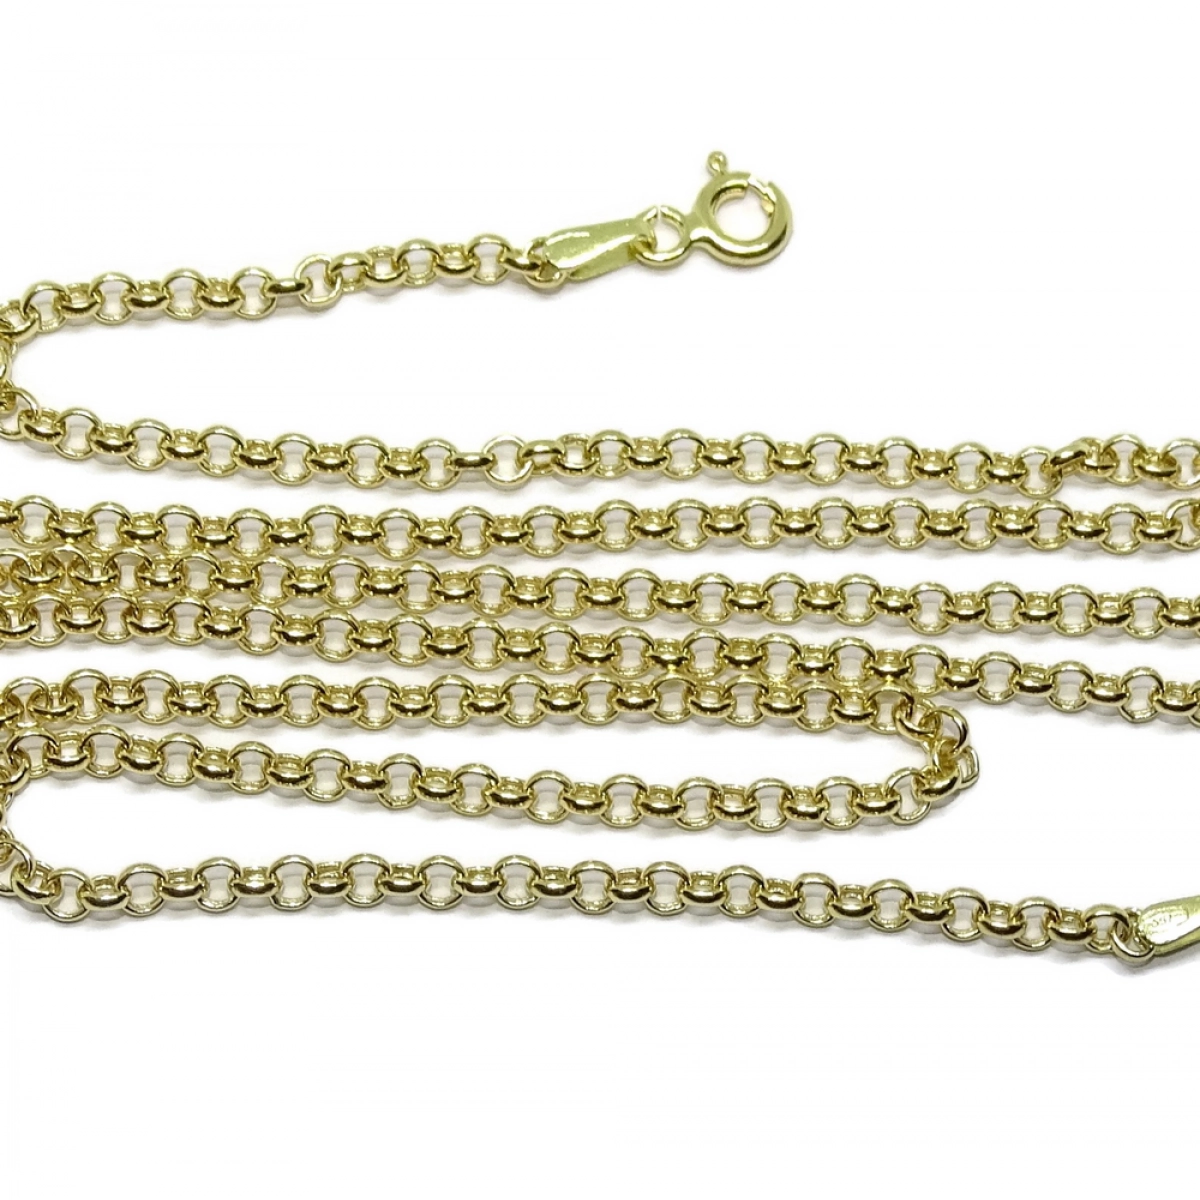 CHAIN FOR WOMEN MADE OF PURE GOLD OF 18K MODEL ROLO FLAT 3MM WIDE, AND 50CM NEVER SAY NEVER